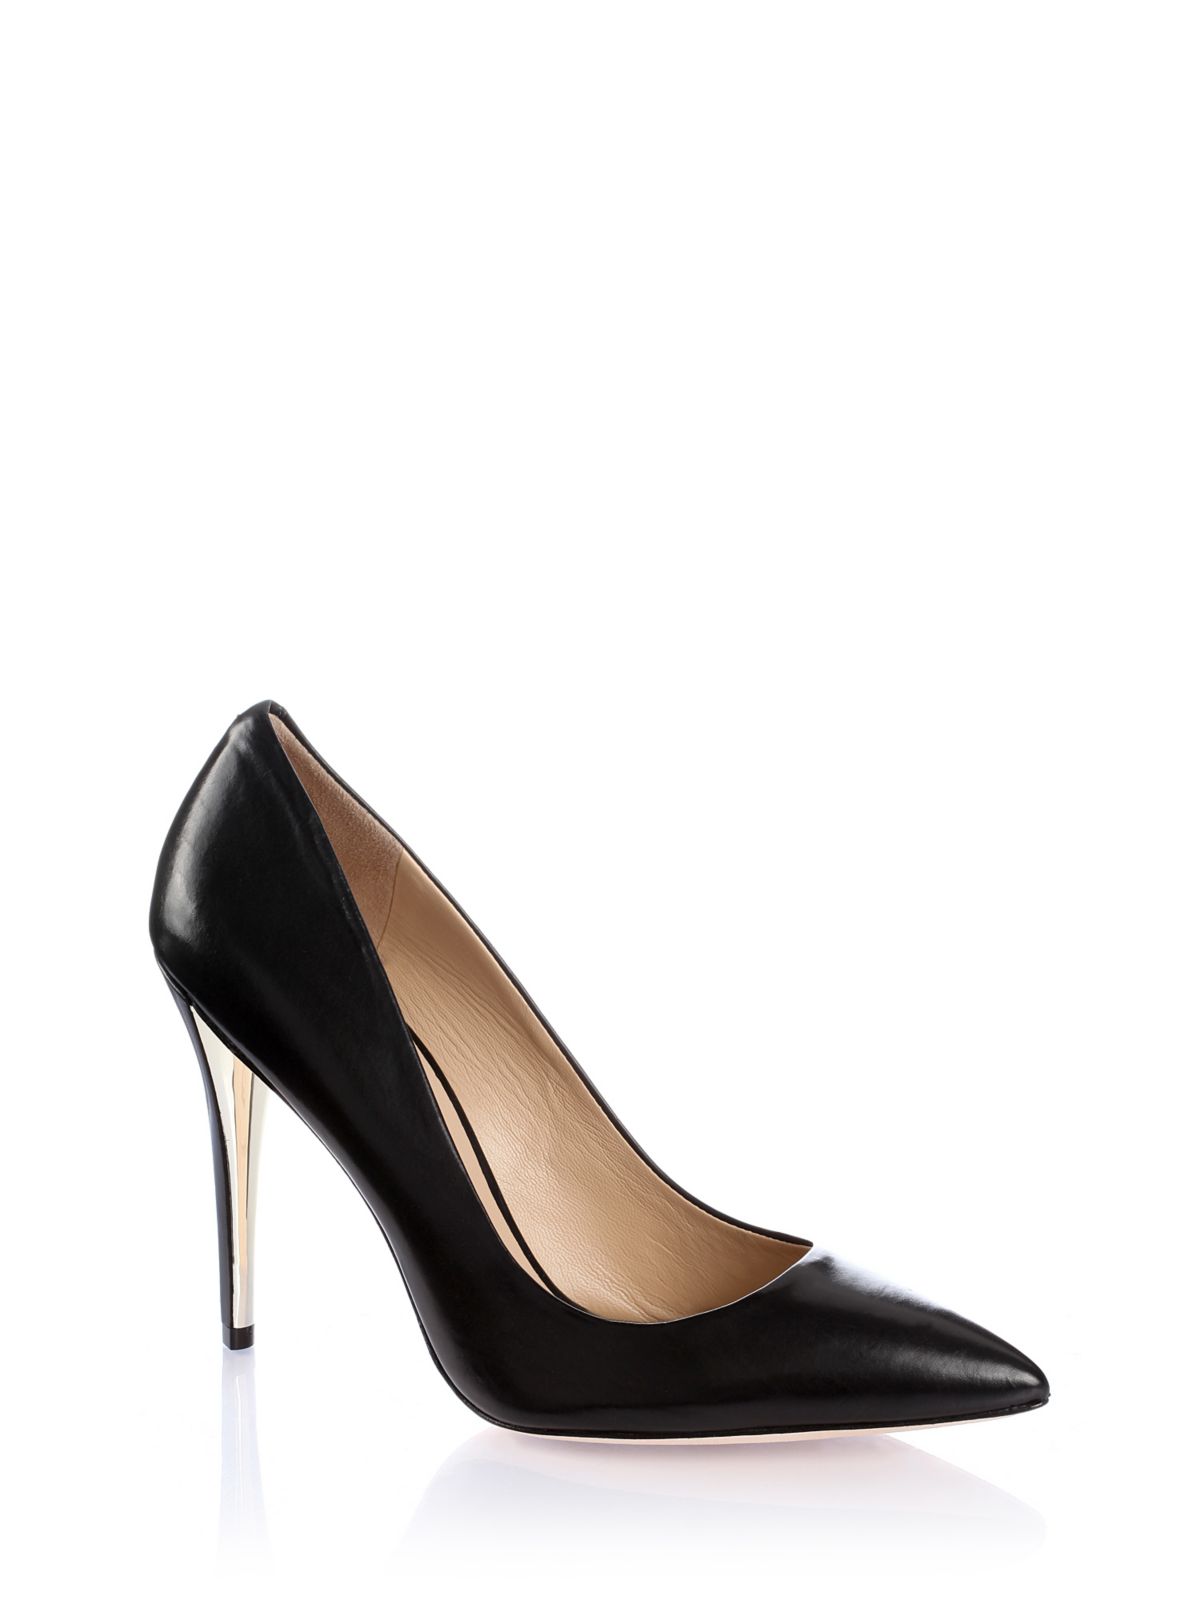 Guess Marciano Amy Court Shoe in Black | Lyst